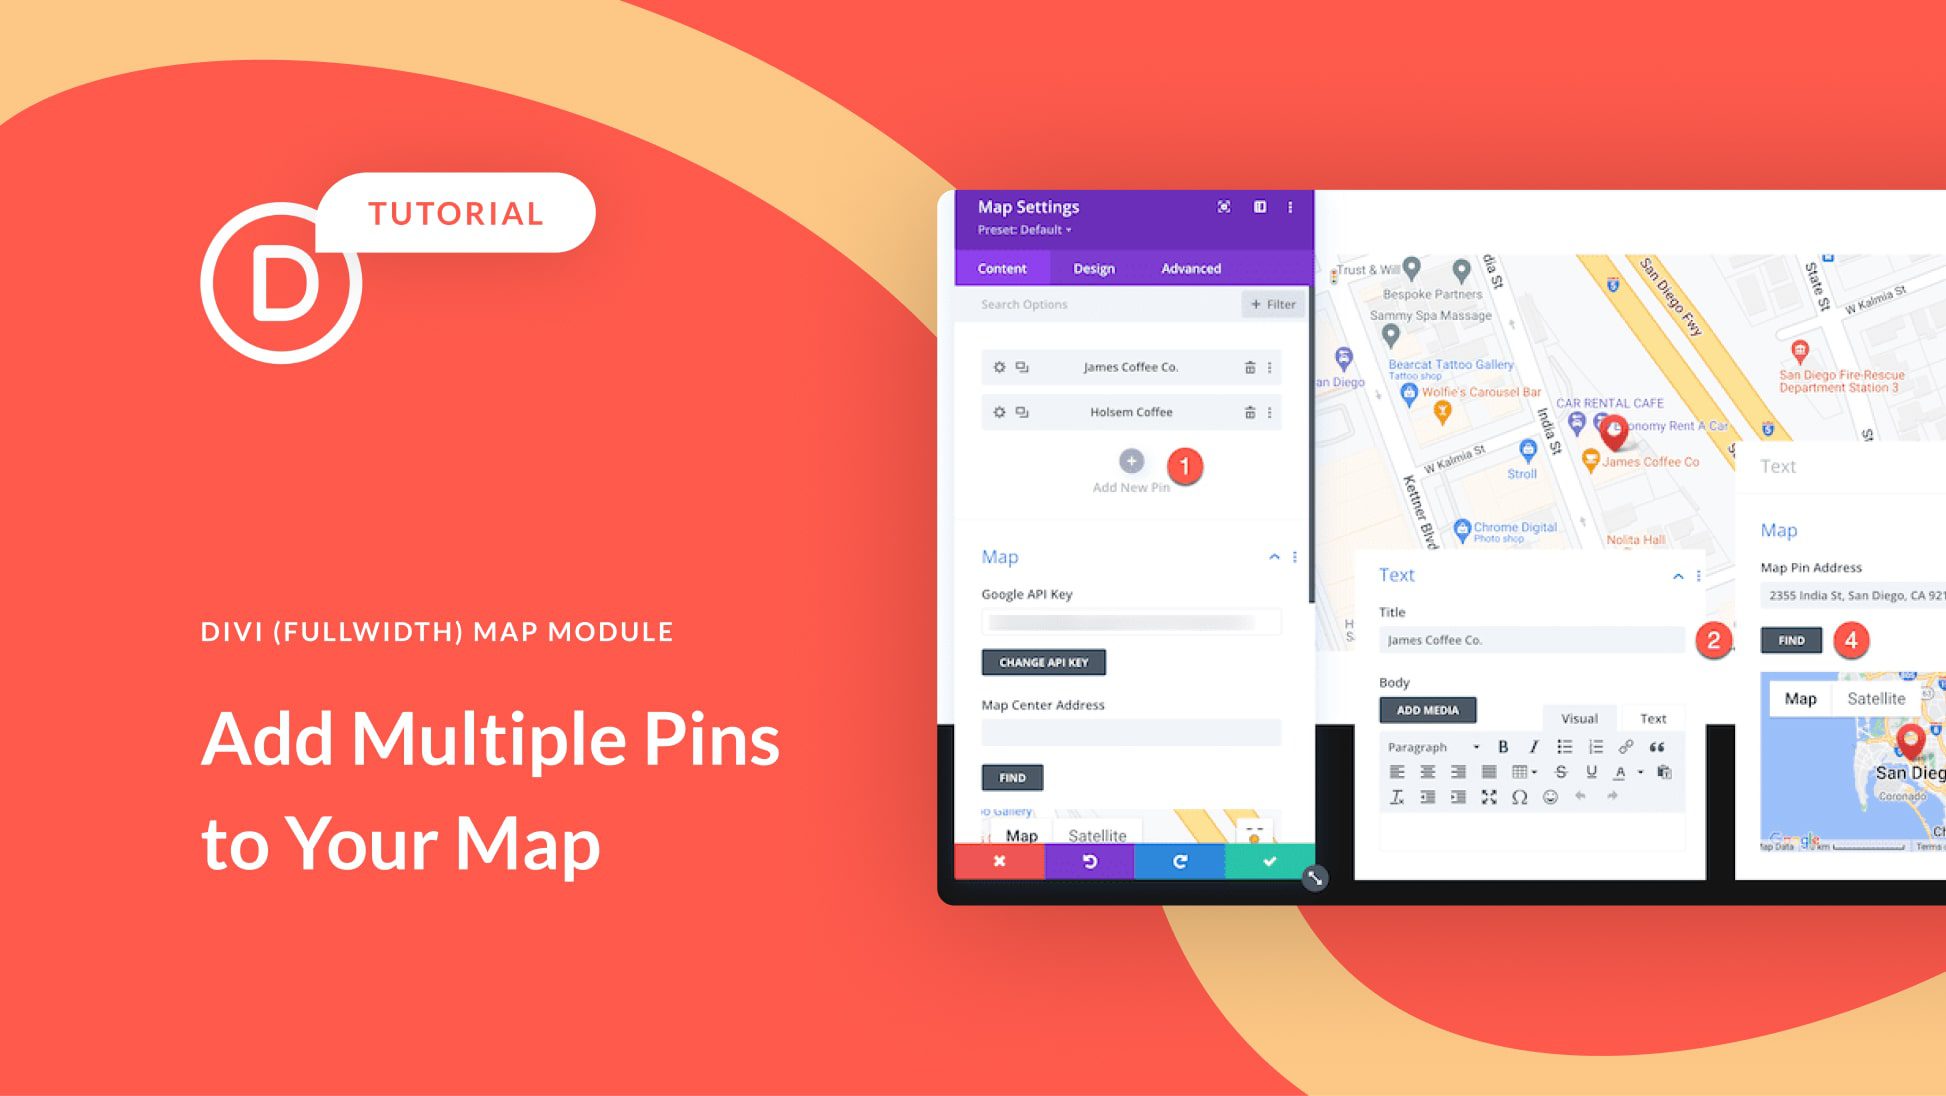 How to Add Multiple Pins to Your Divi Map